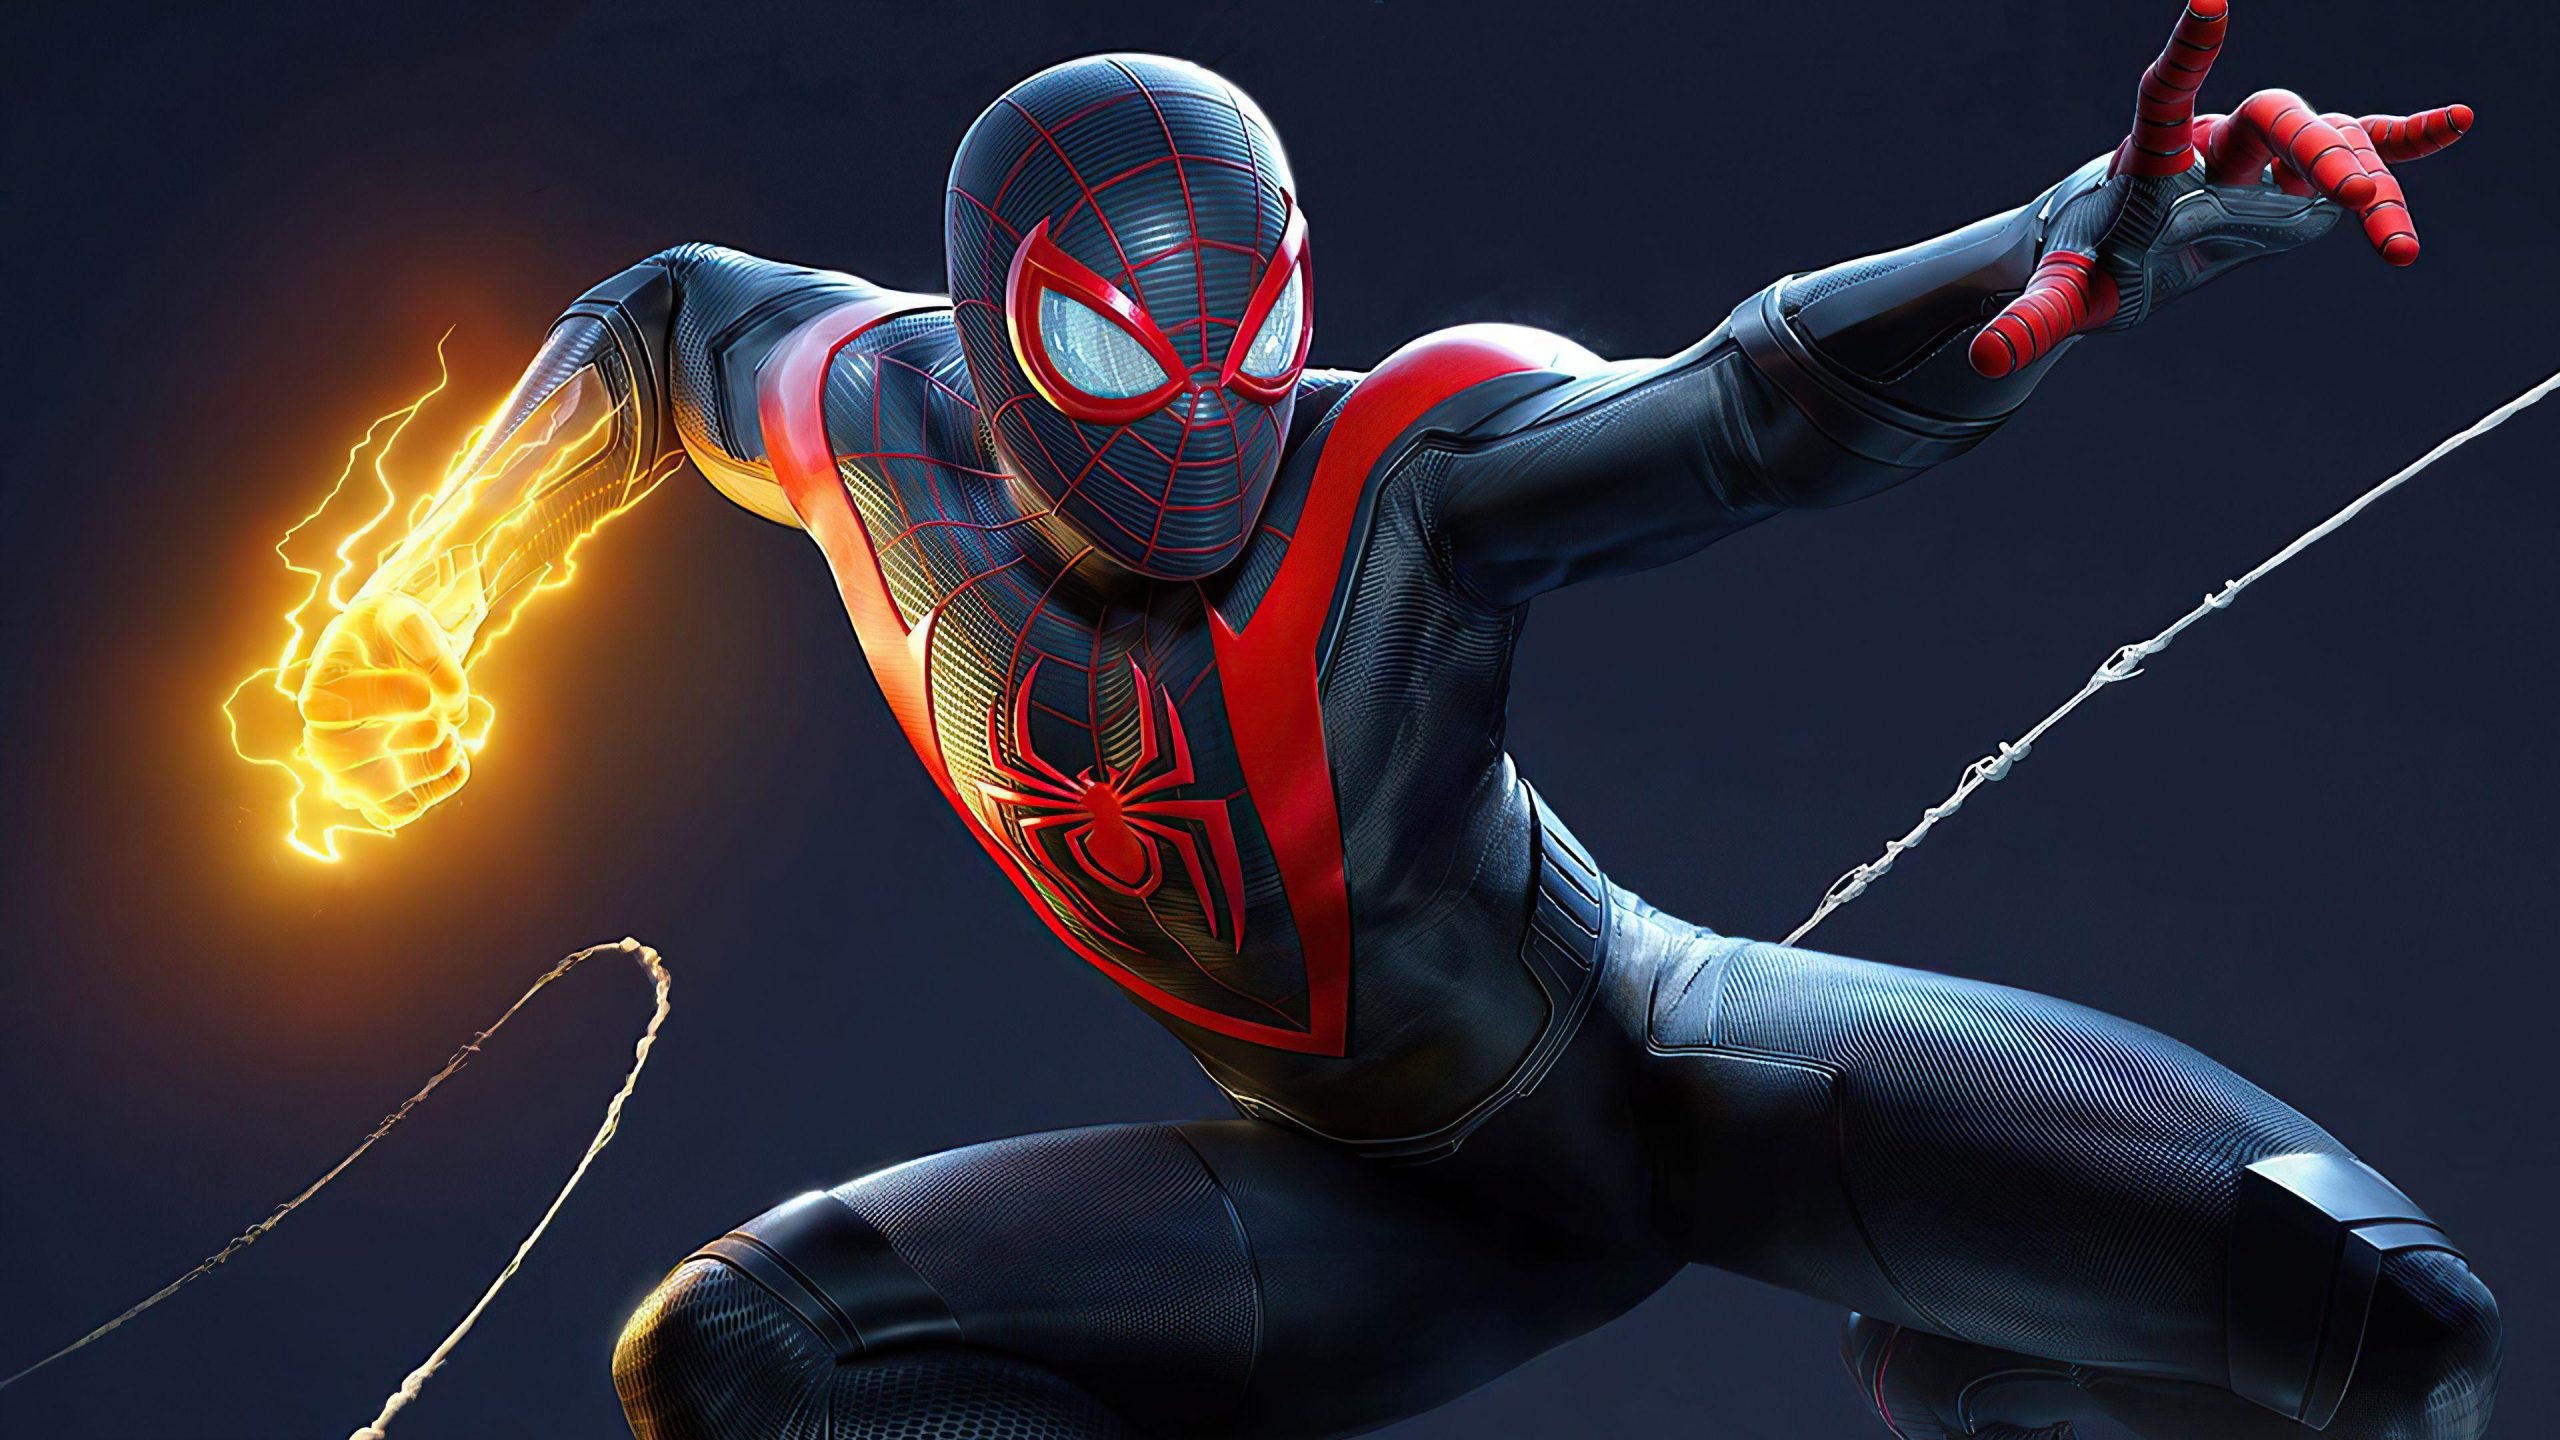 Spider-Man And Miles Morales cool wallpaper